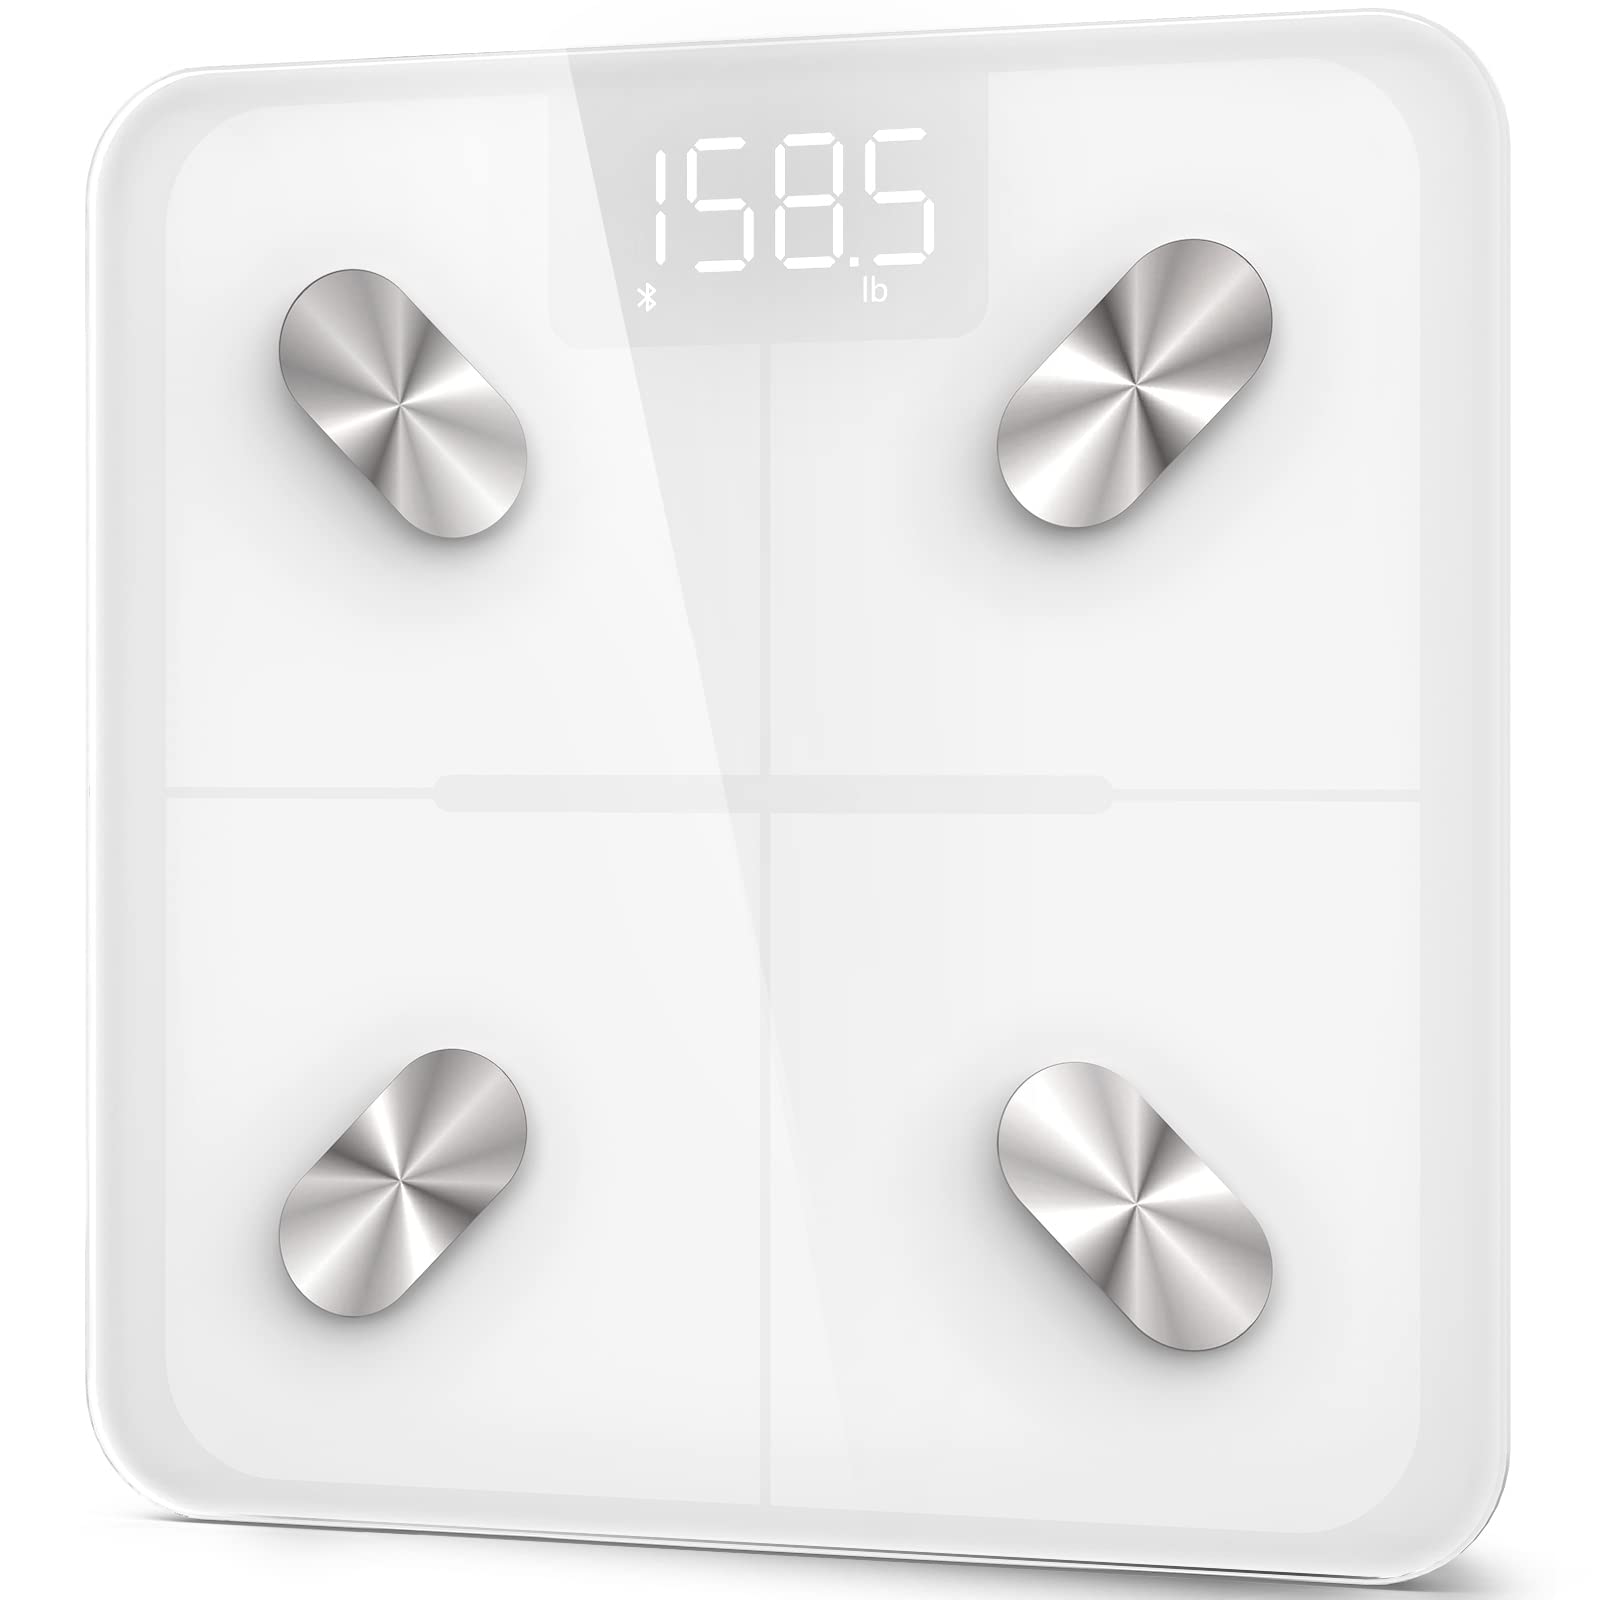 Etekcity Scale for Body Weight, Digital Bathroom Scale for People,, 400 lbs.